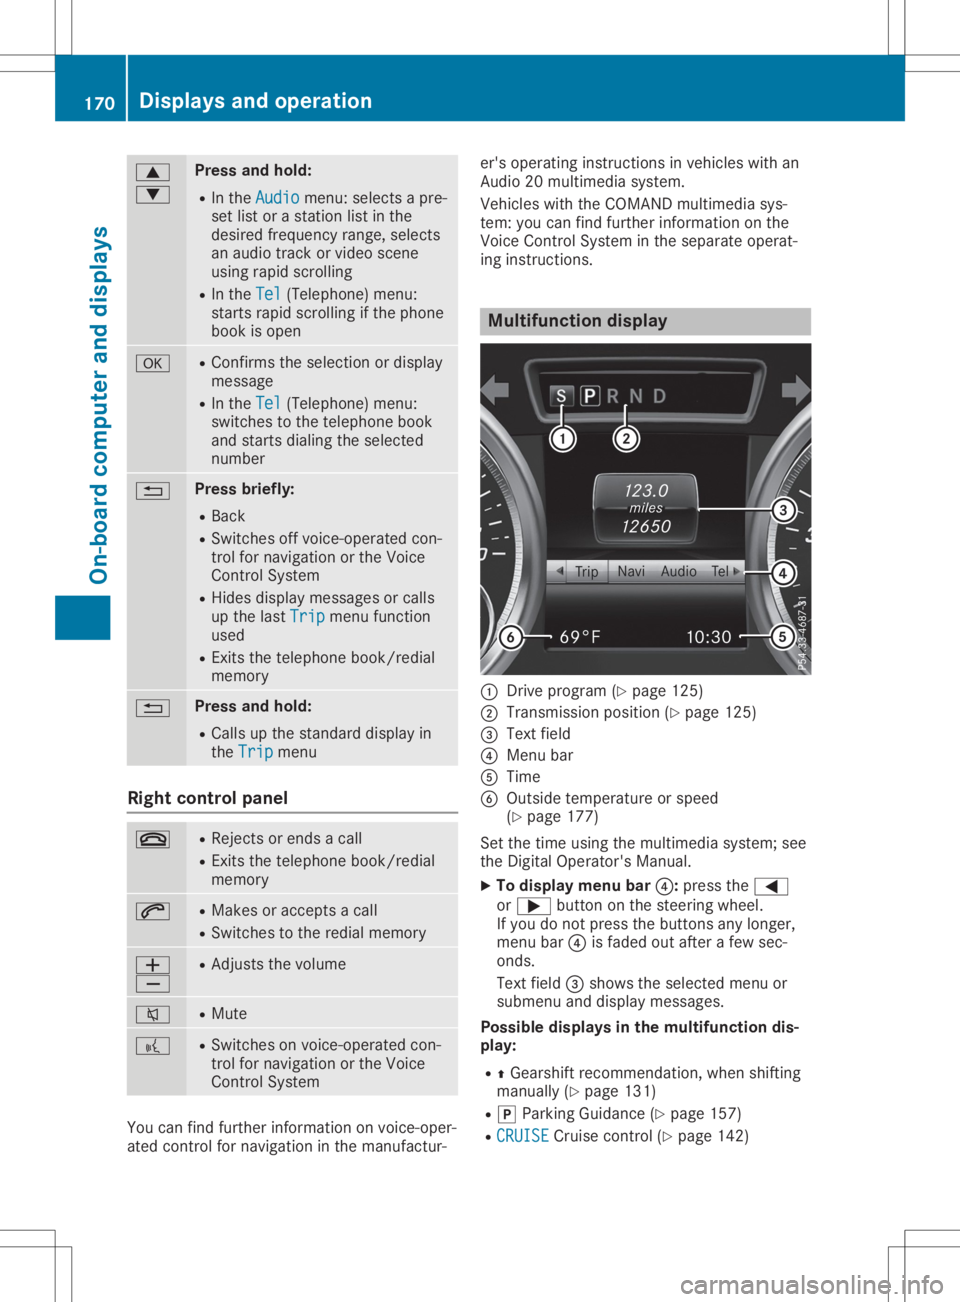 MERCEDES-BENZ SLC 2020  Owners Manual 0063
0064 Press
andhold:
R In the Audio Audio
menu: selects apre-
set listoras tation listinthe
desired frequency range,selects
an audio trackorvideo scene
using rapidscrolling
R In the Tel Tel
(Telep